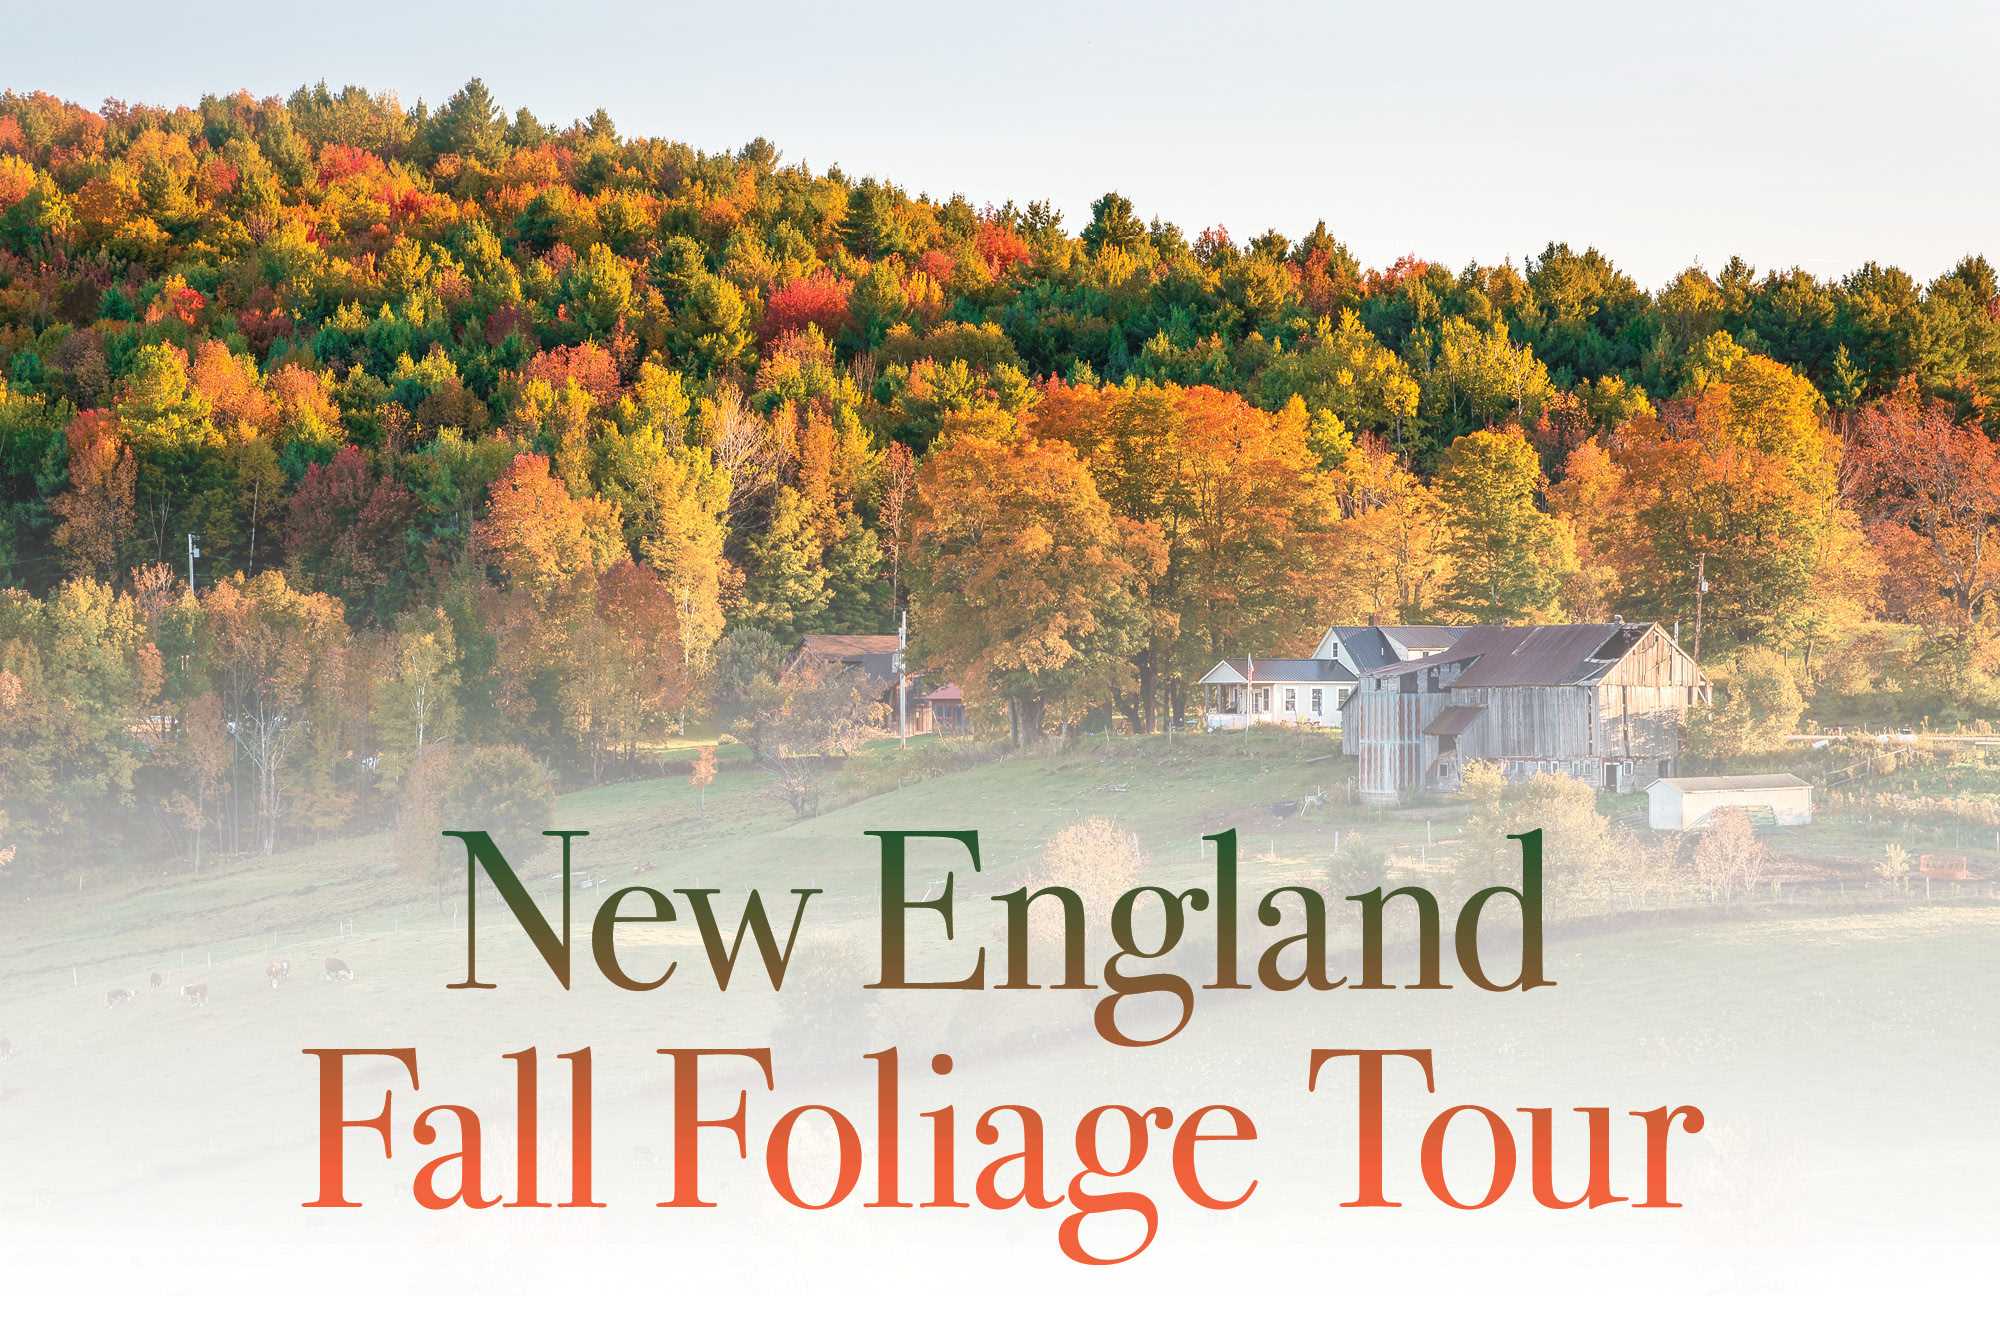 Image for New England Fall Foliage trip press release.